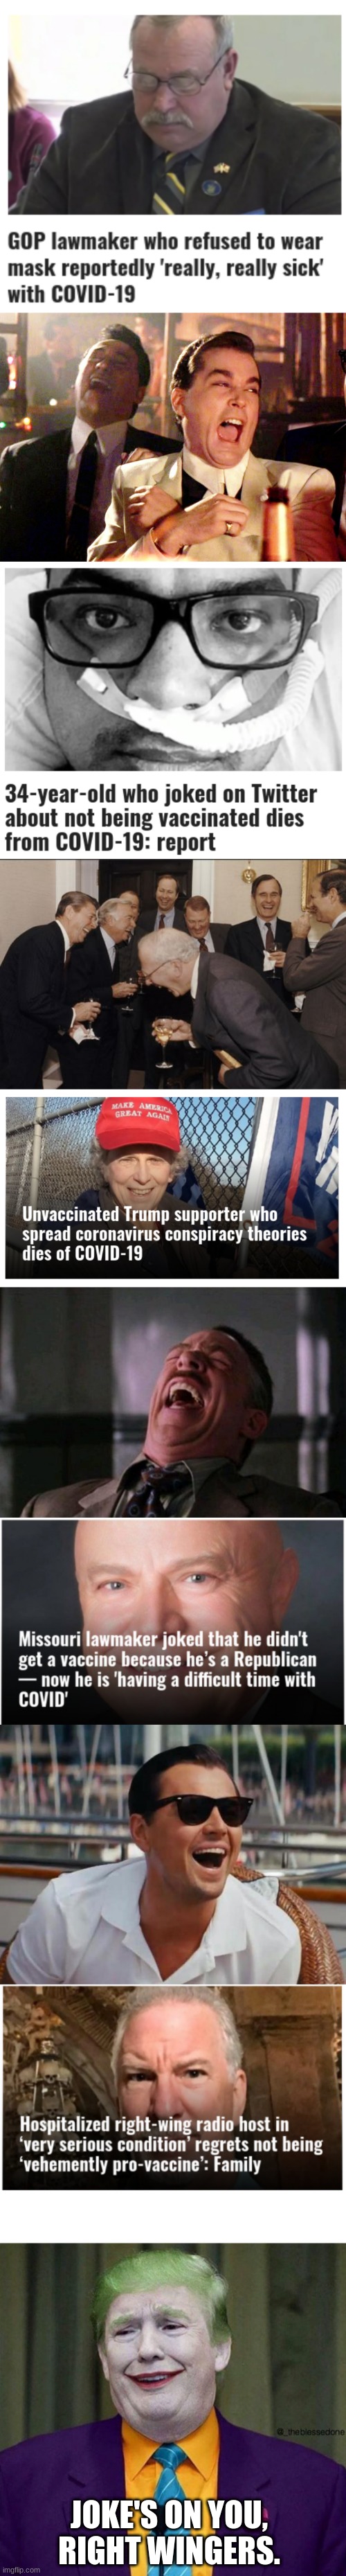 This isn't a disease, it's natural selection | JOKE'S ON YOU, RIGHT WINGERS. | image tagged in memes,good fellas hilarious,laughing men in suits,spider man boss,haha,donald trump joker laughing | made w/ Imgflip meme maker